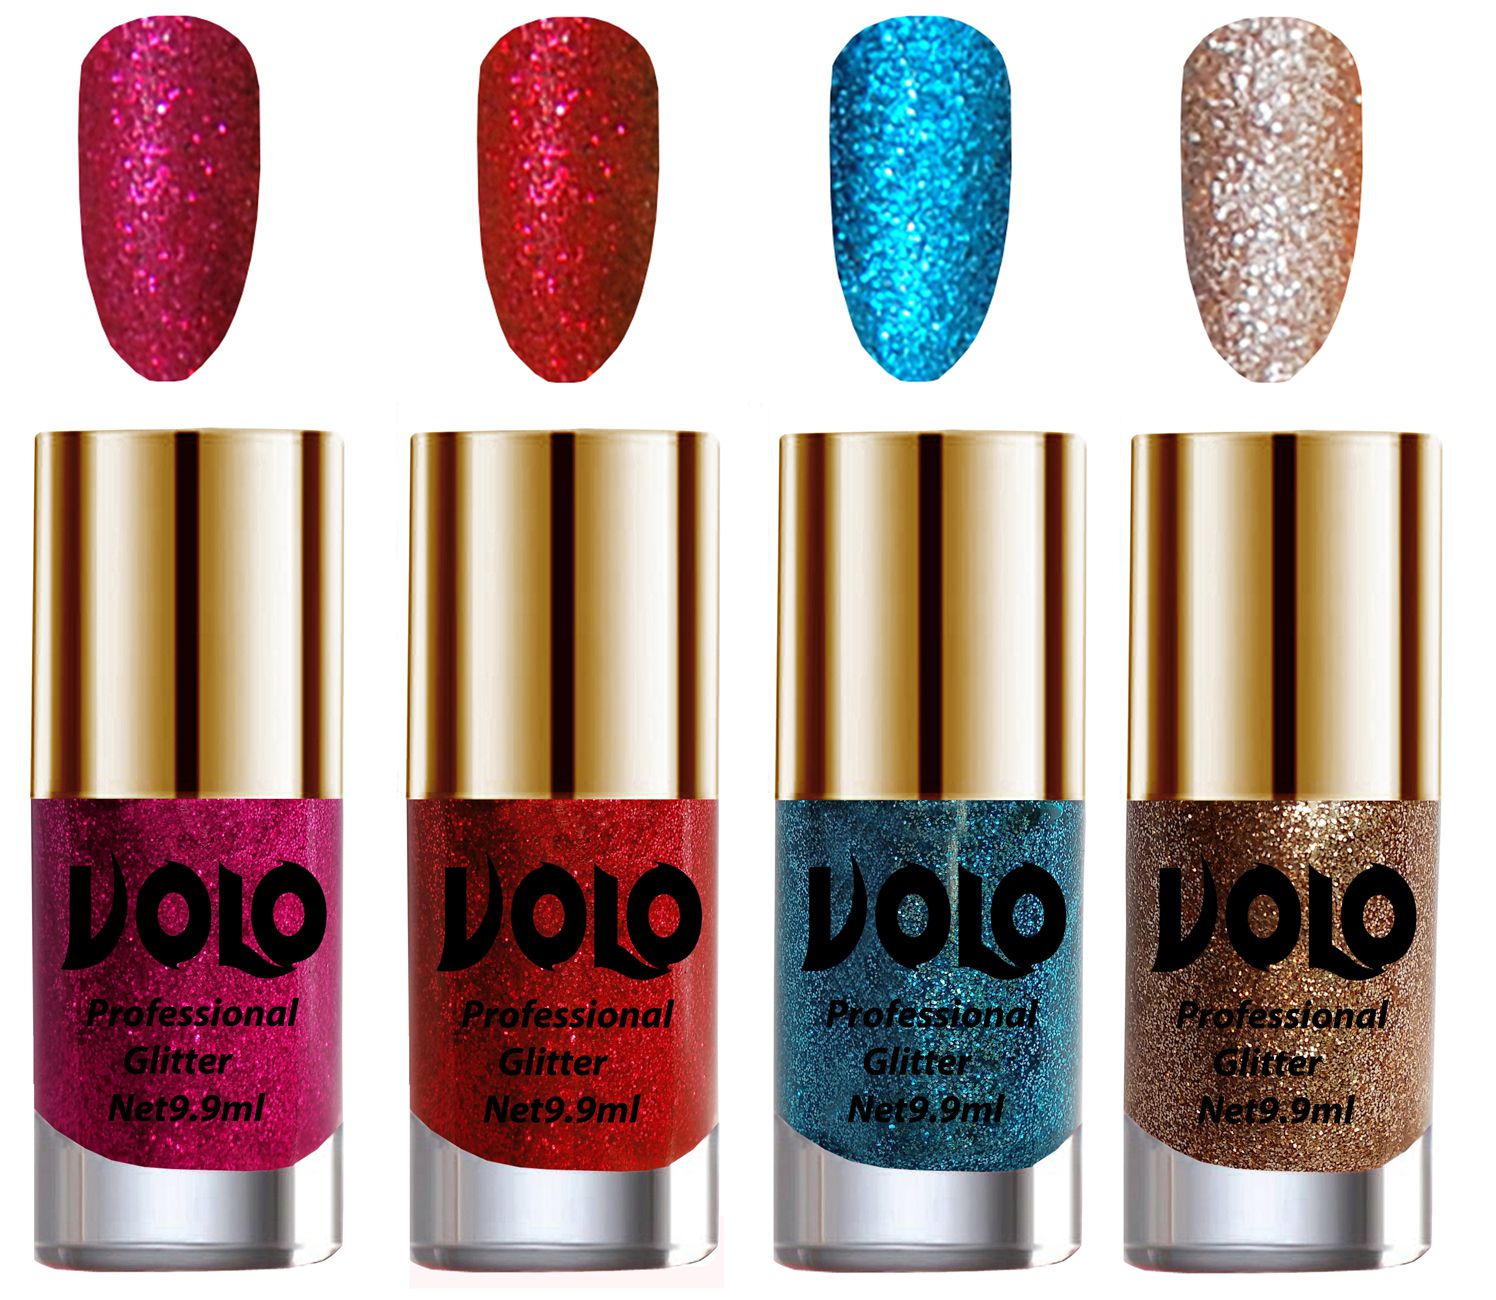     			VOLO Professionally Used Glitter Shine Nail Polish Magenta,Red,Blue Gold Pack of 4 39 mL